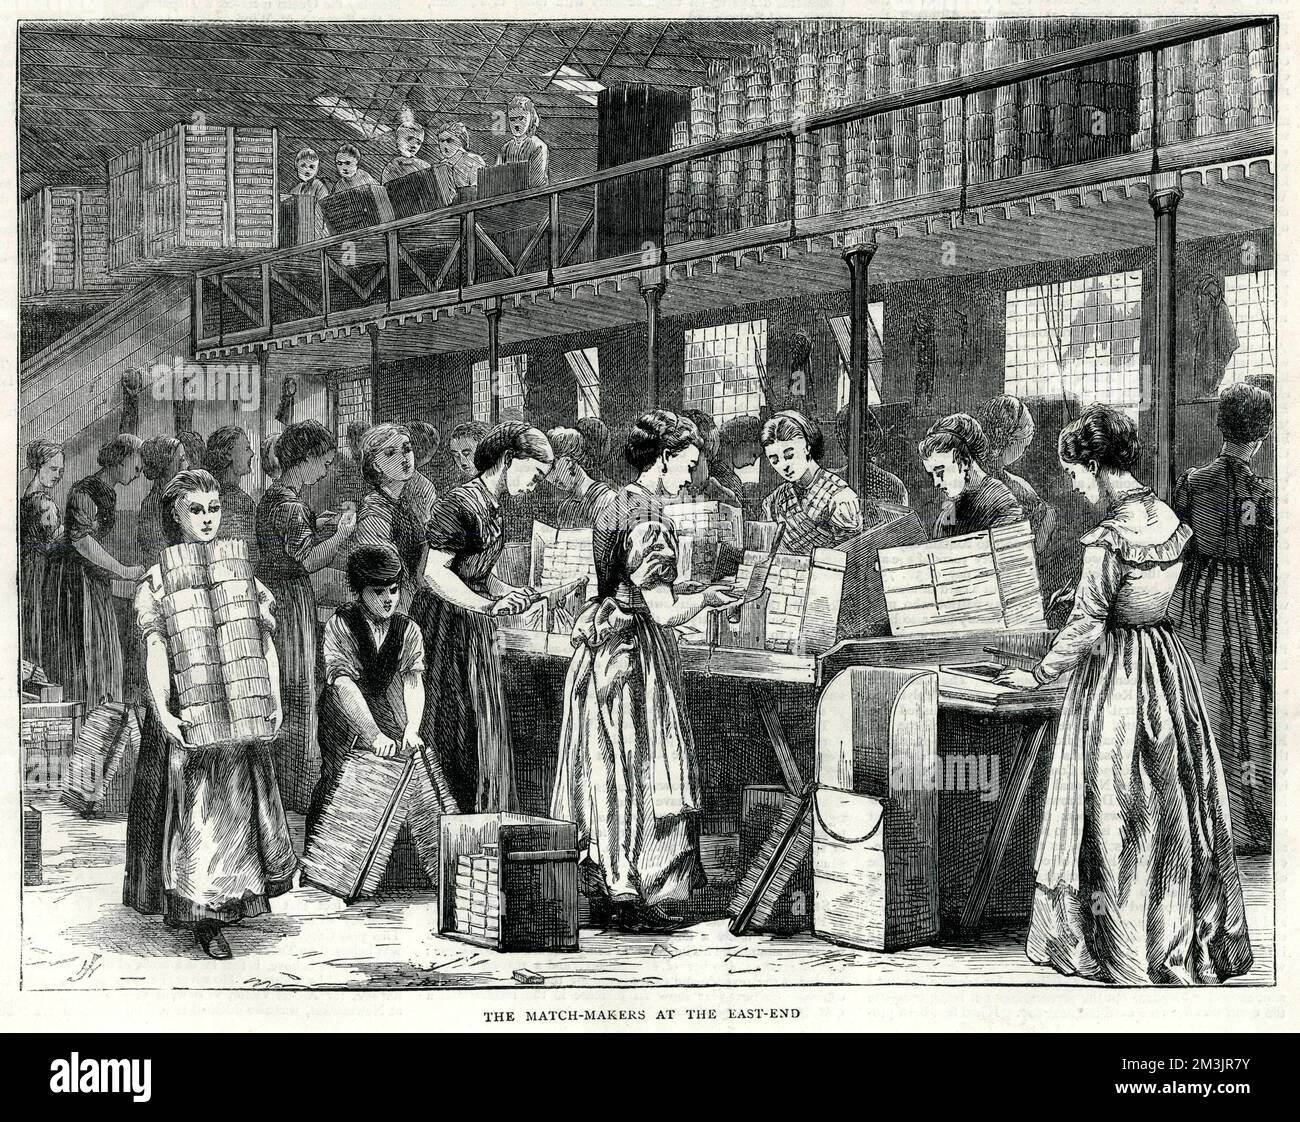 The Match Makers of the East End. The match-making industry employed mainly female workers and came to prominence in 1888 during the match-making strike when, led by Annie Besant, the workers at the Bryant &amp; May match factory in Bow went on strike in protest over long working hours and dangerous conditions.     Date: 1871 Stock Photo